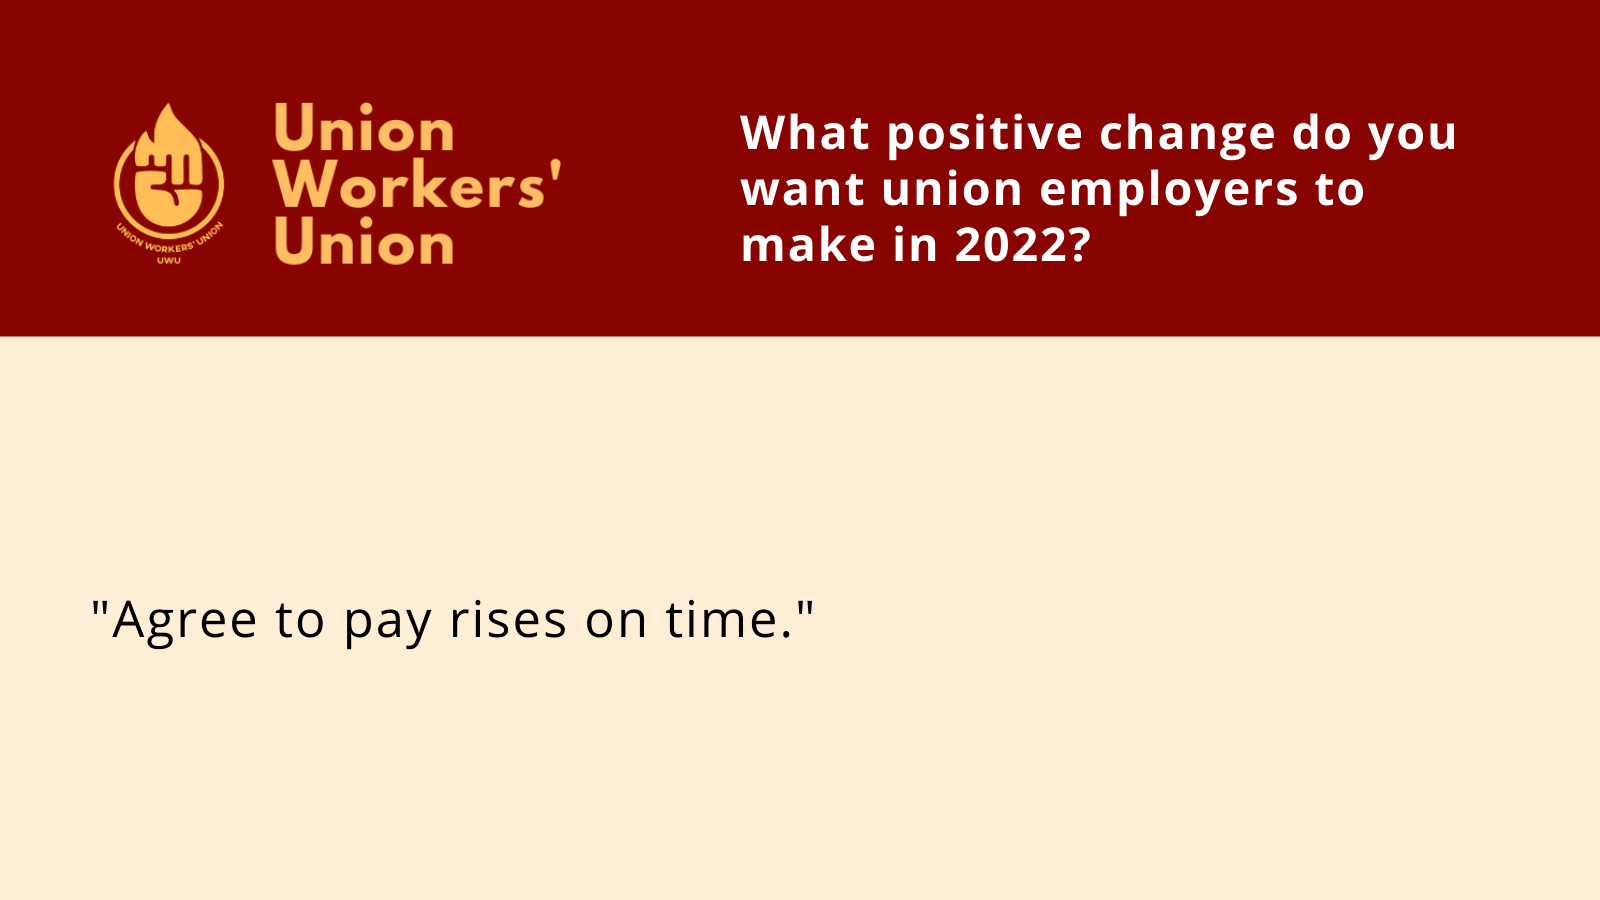 UWU logo next to question, what positive changes do you want union employers to make in 2022? Member response: Agree to pay rises on time.